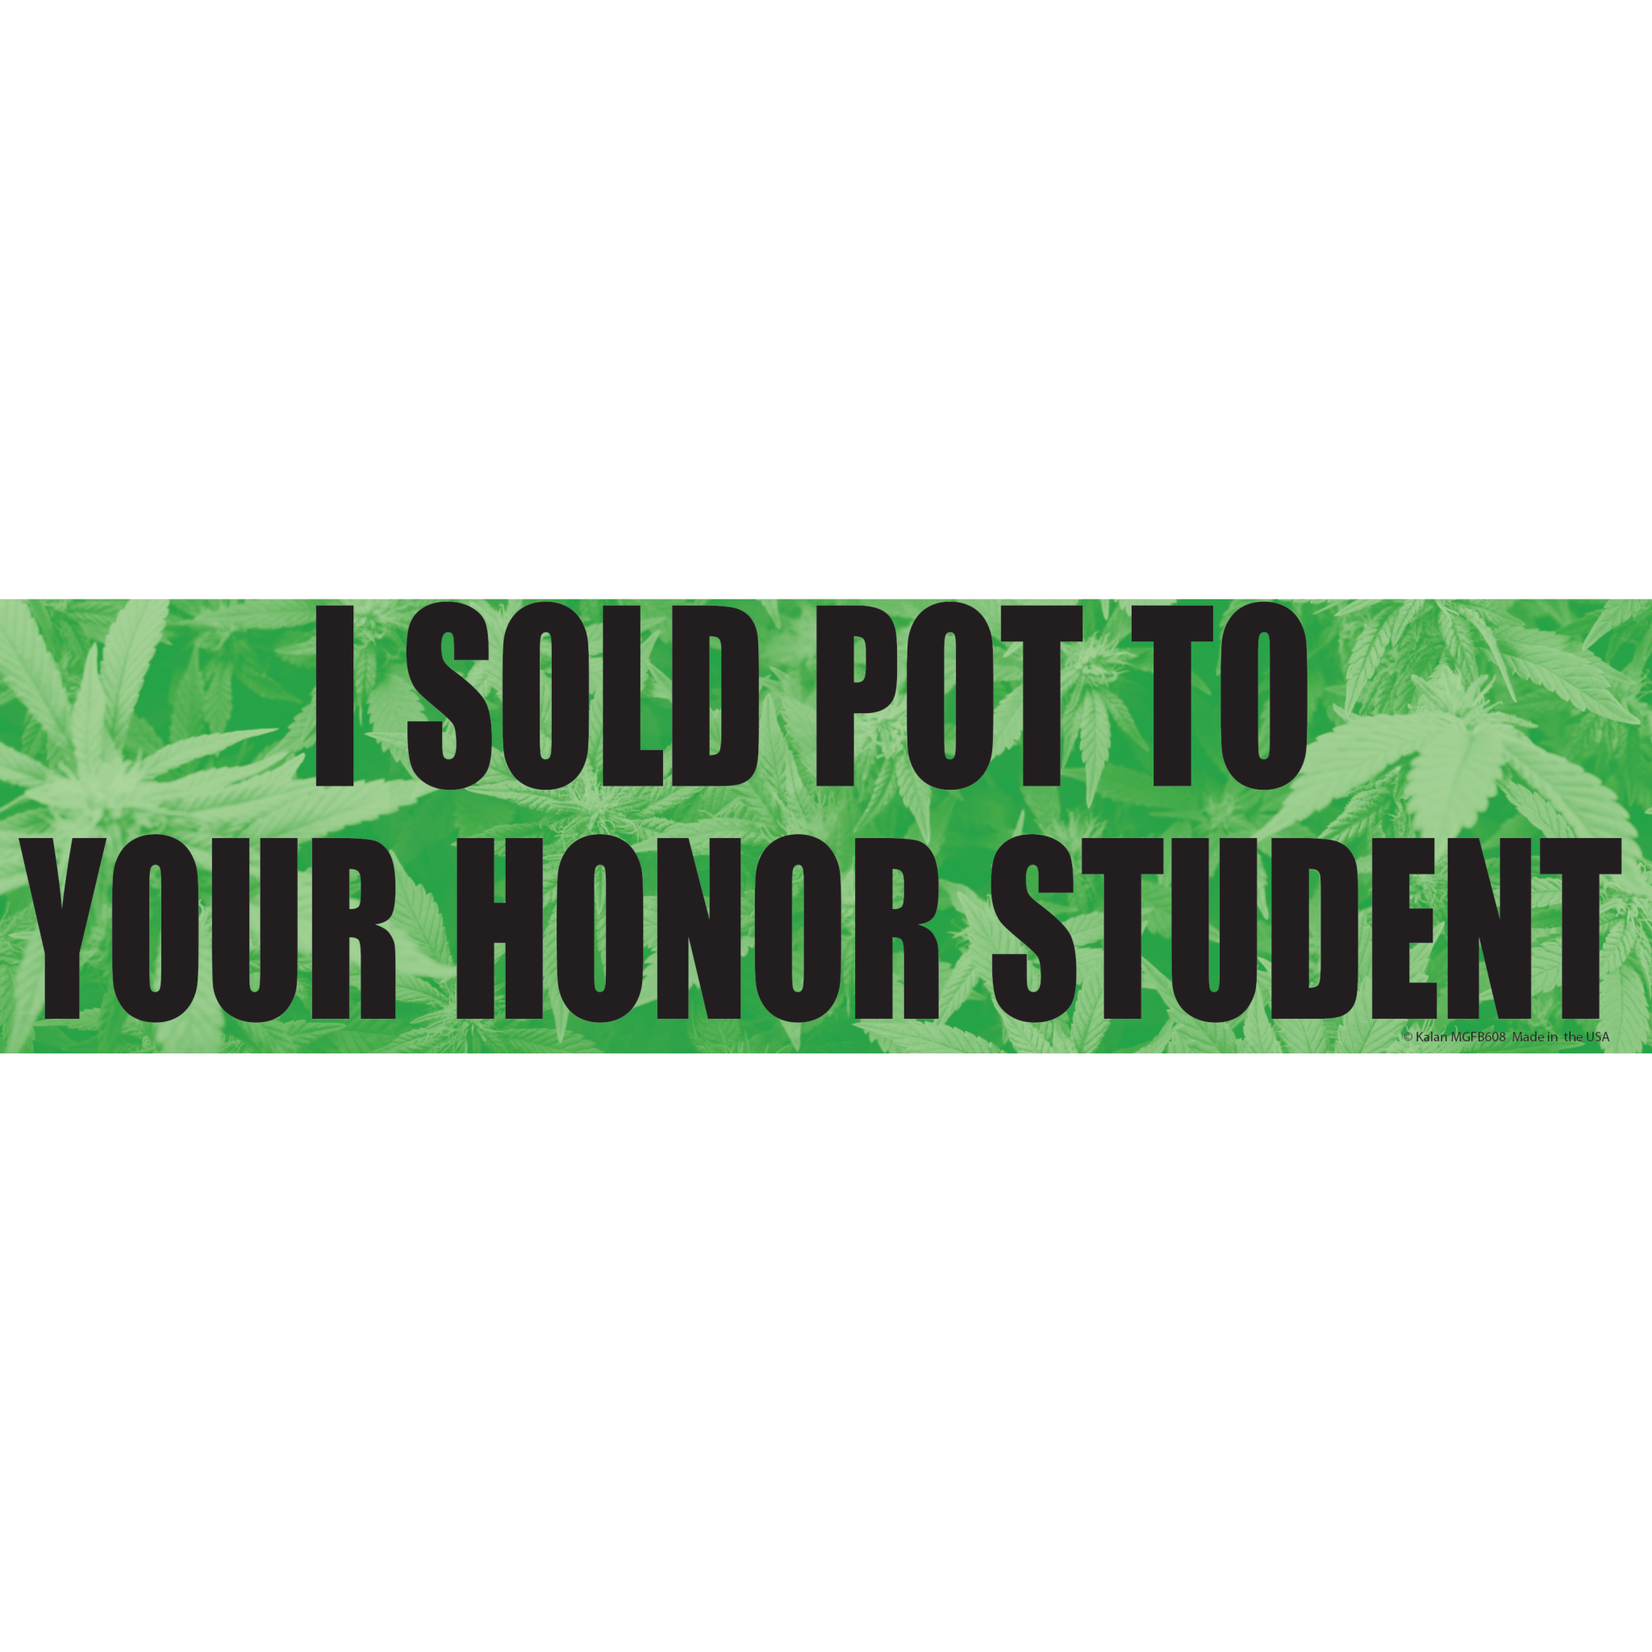 Magnet (Bumper Sized) - I Sold Pot To Your Honor Student (Weed)